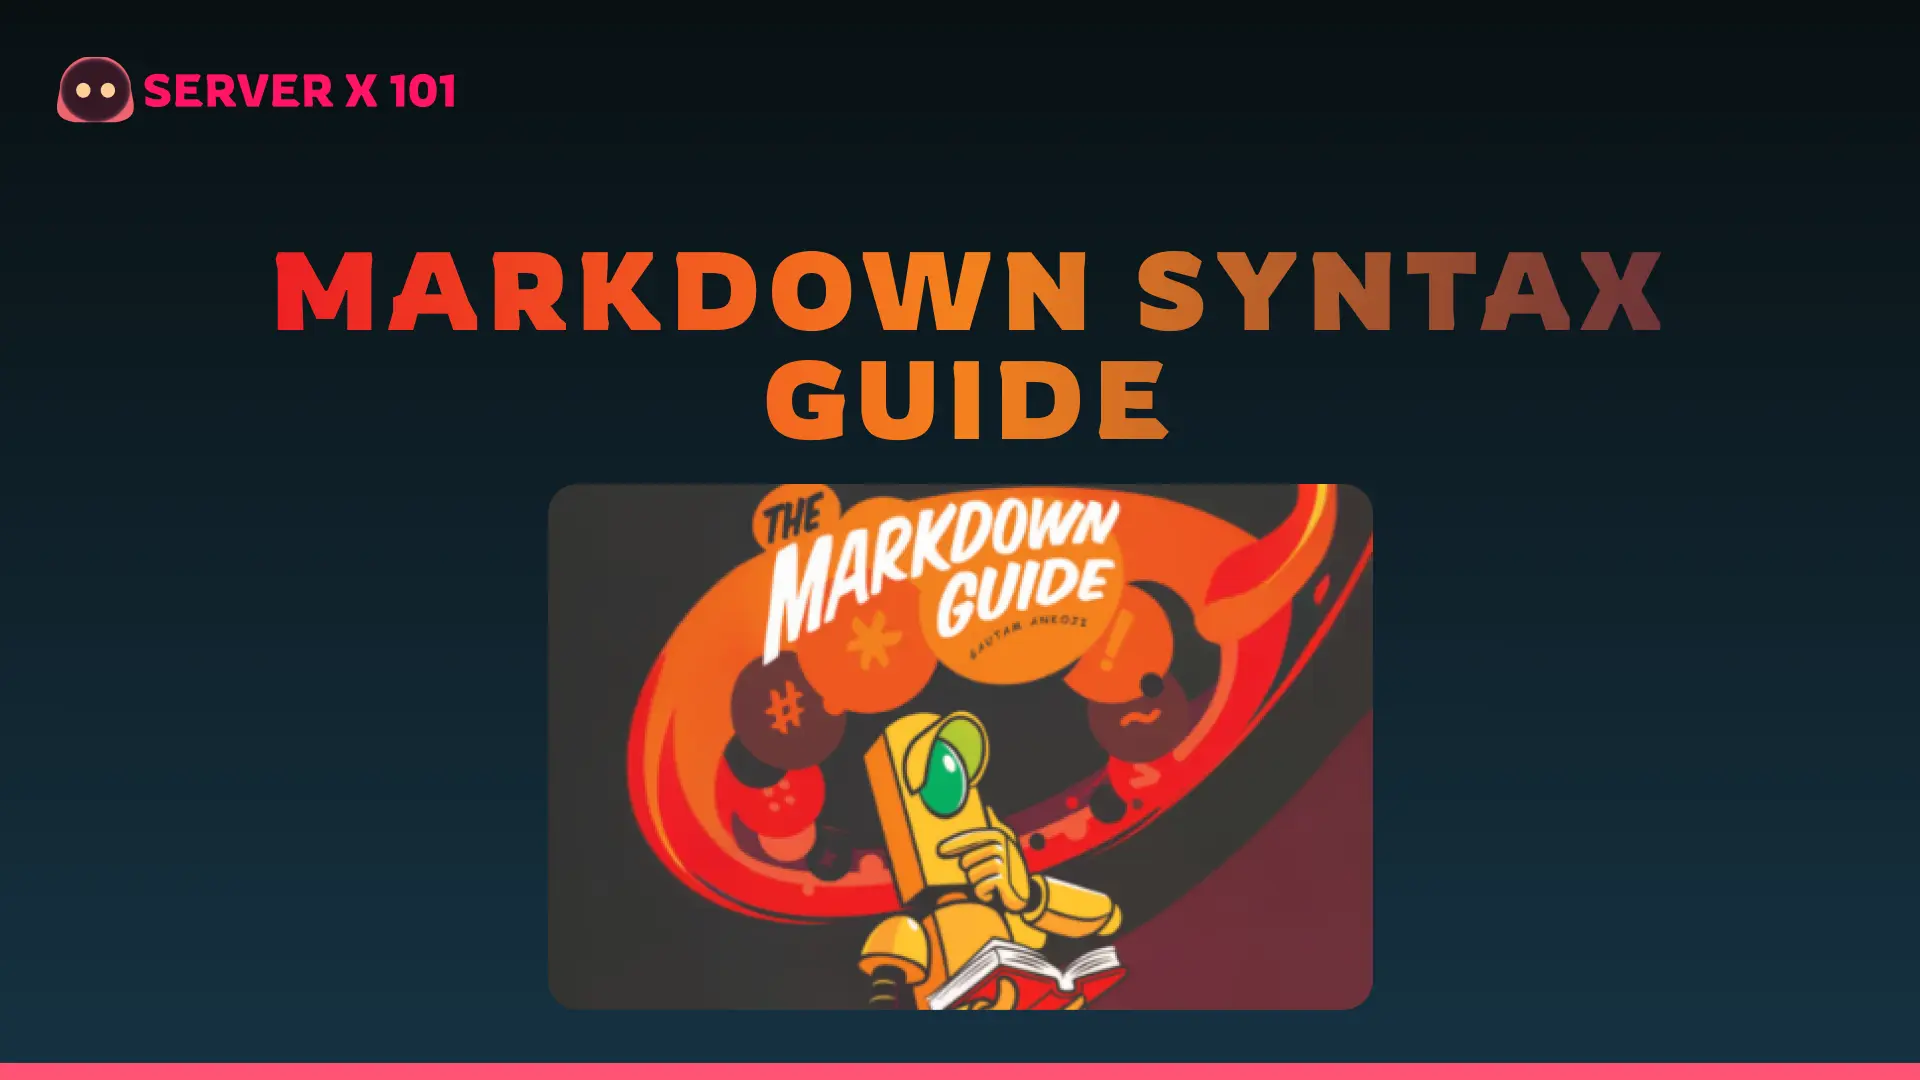 Markdown Syntax Guide